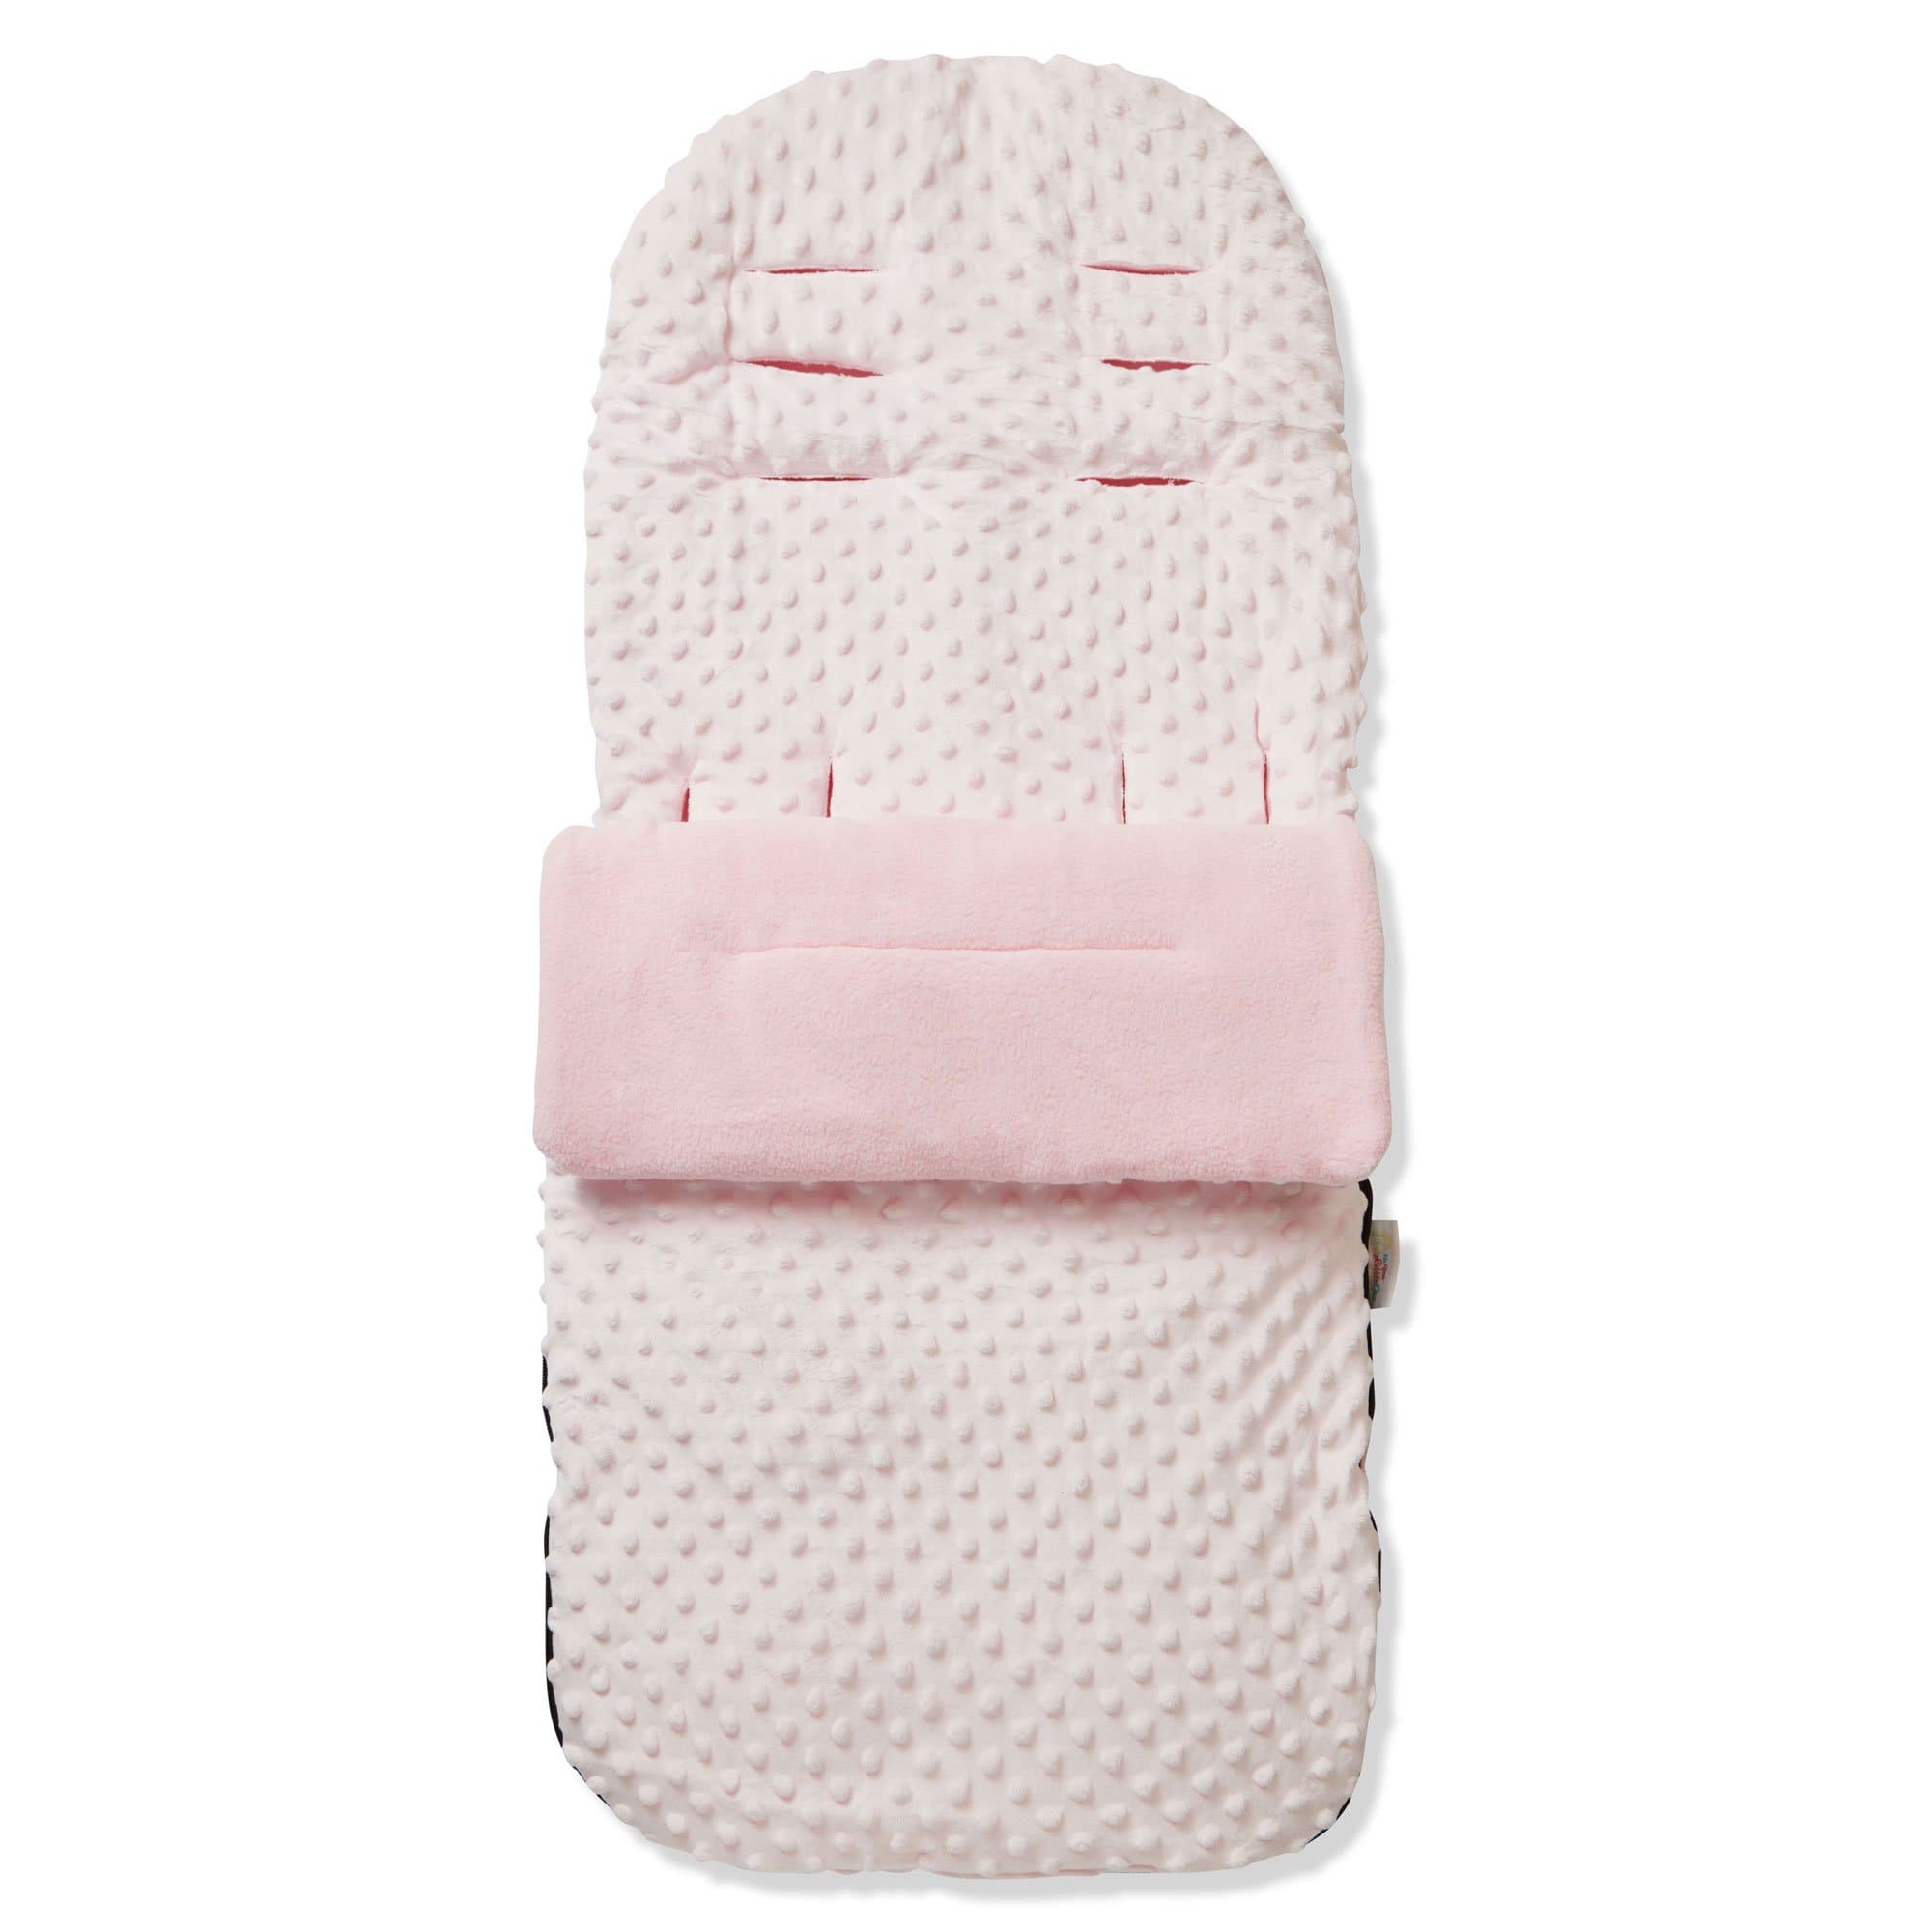 Dimple Footmuff / Cosy Toes Compatible with Emmaljunga - Pink / Fits All Models | For Your Little One